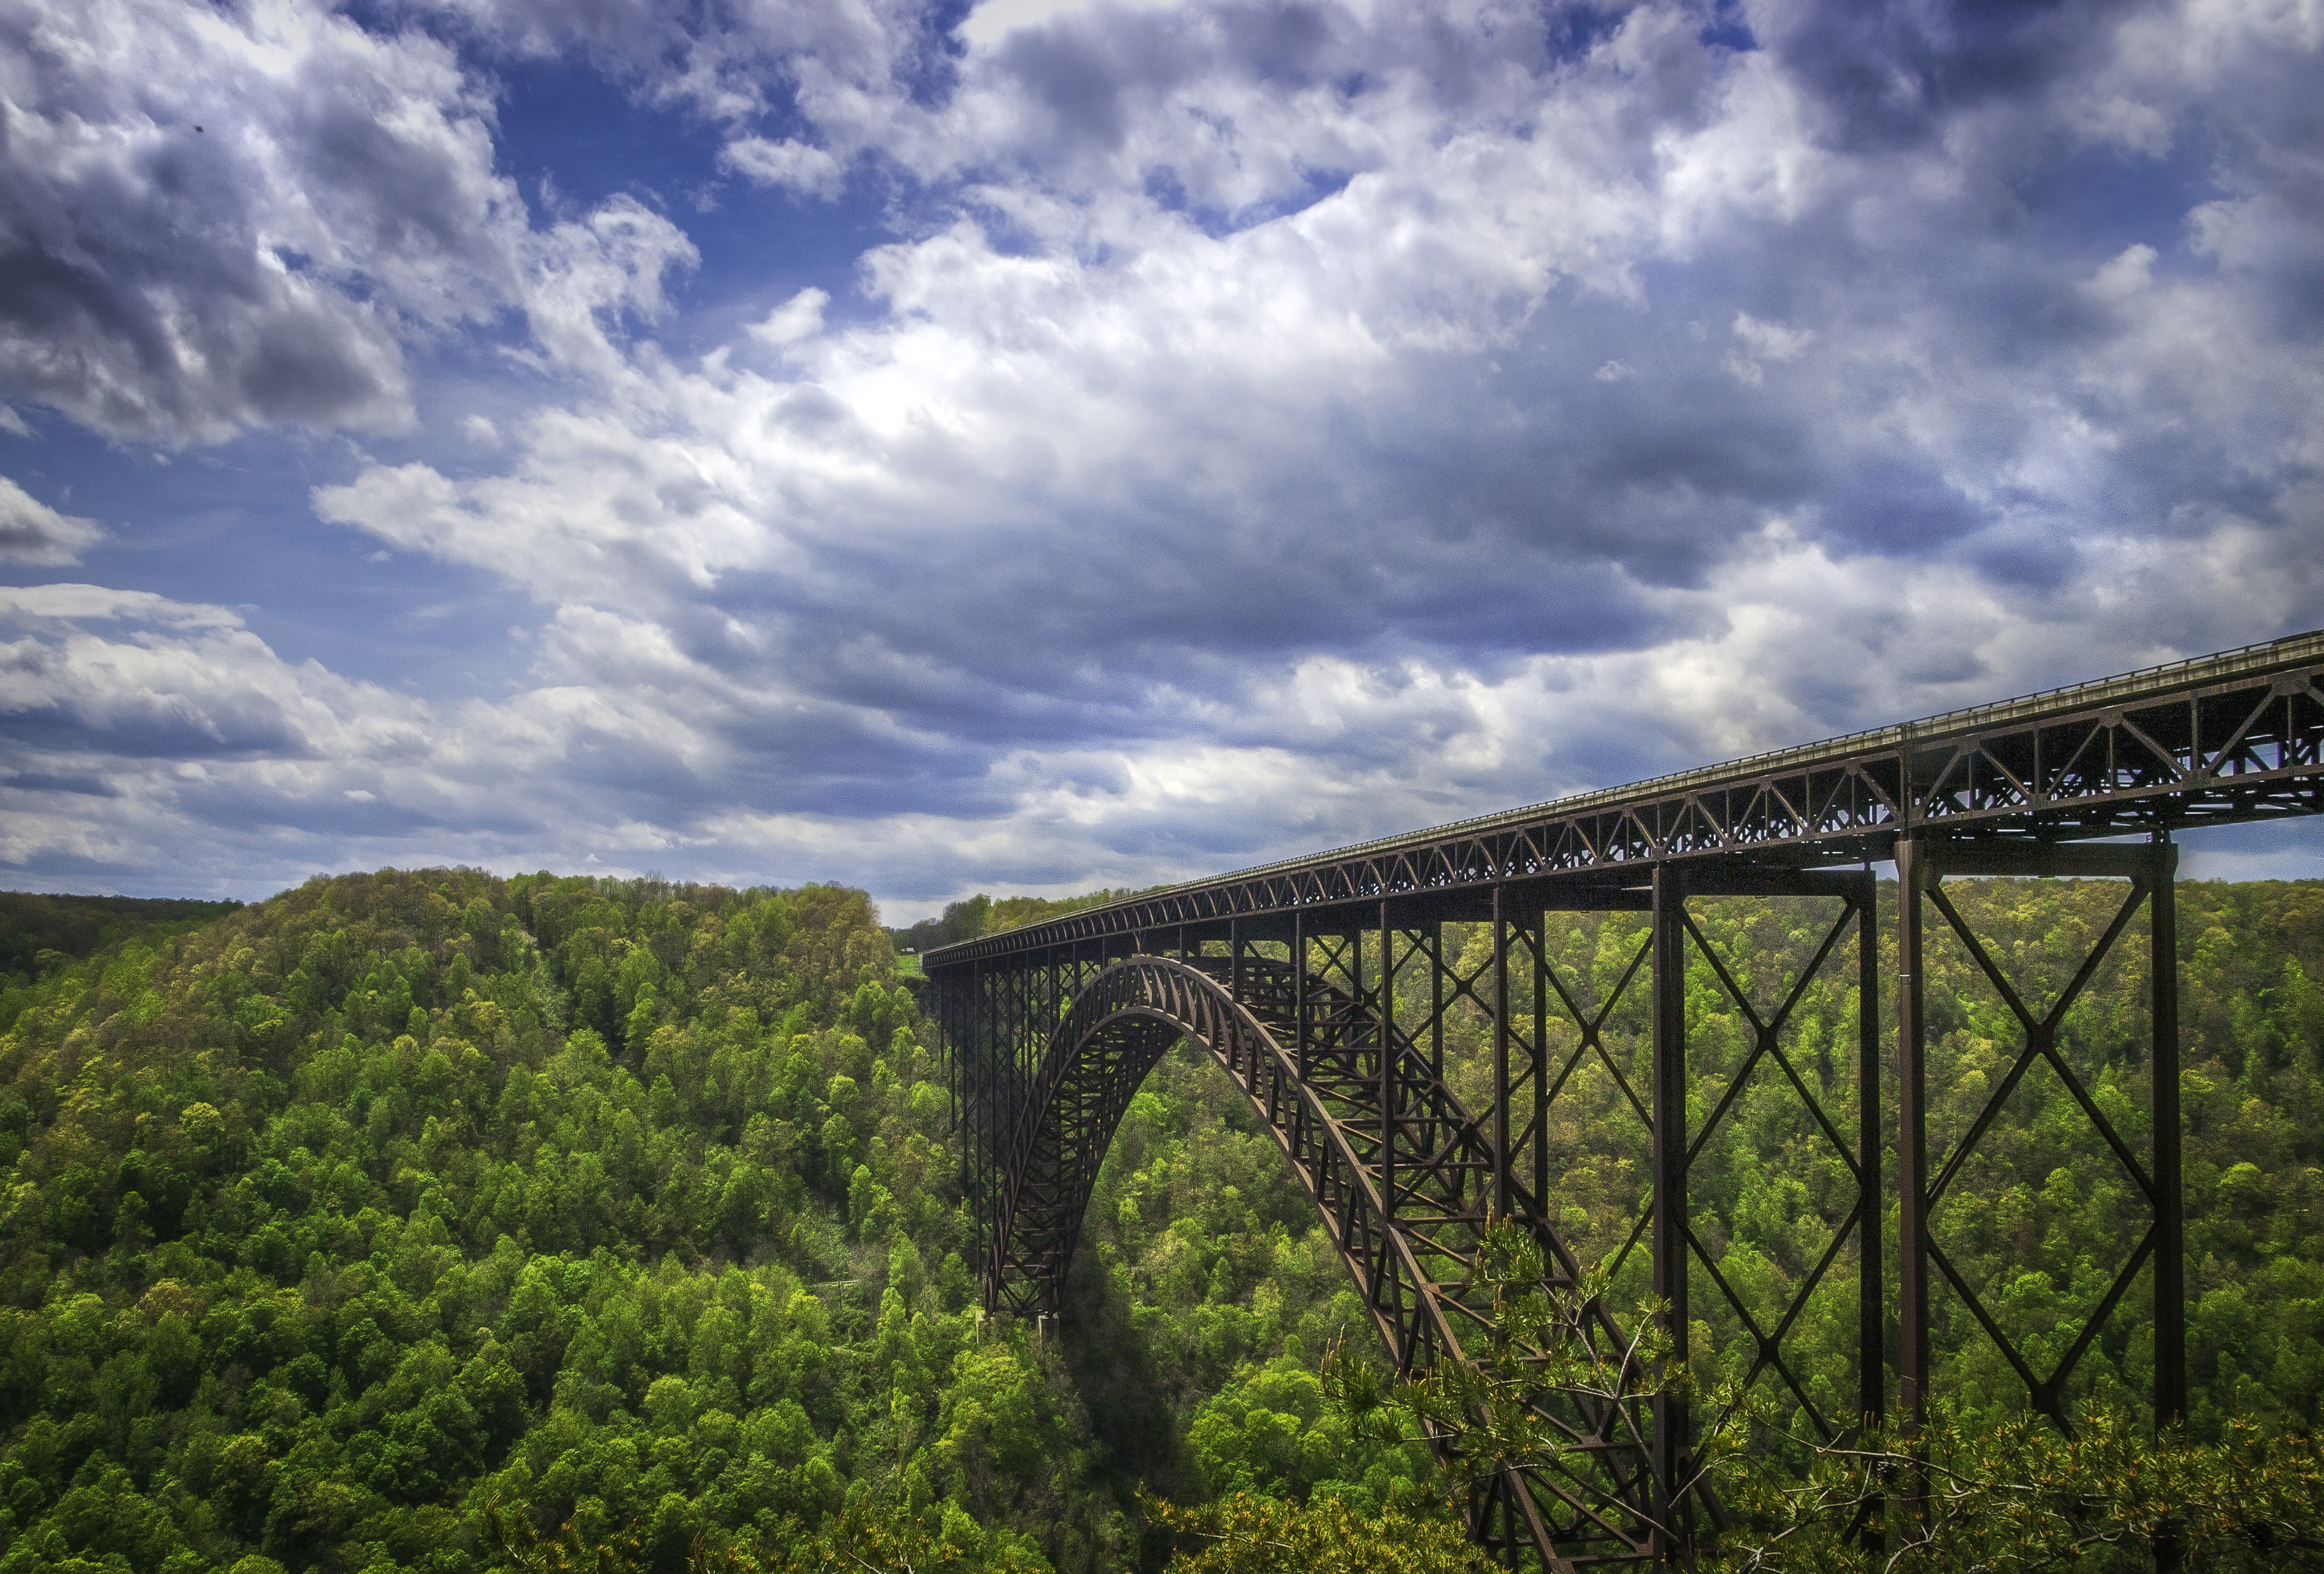 View of the New River Gorge Bridge from the overlook at the north end of the New River Gorge (facing southwards), near Fayetteville, West Virginia. Taken May 5, 2013 using an Olympus E-3 DSLR by Shawn Ullerup.